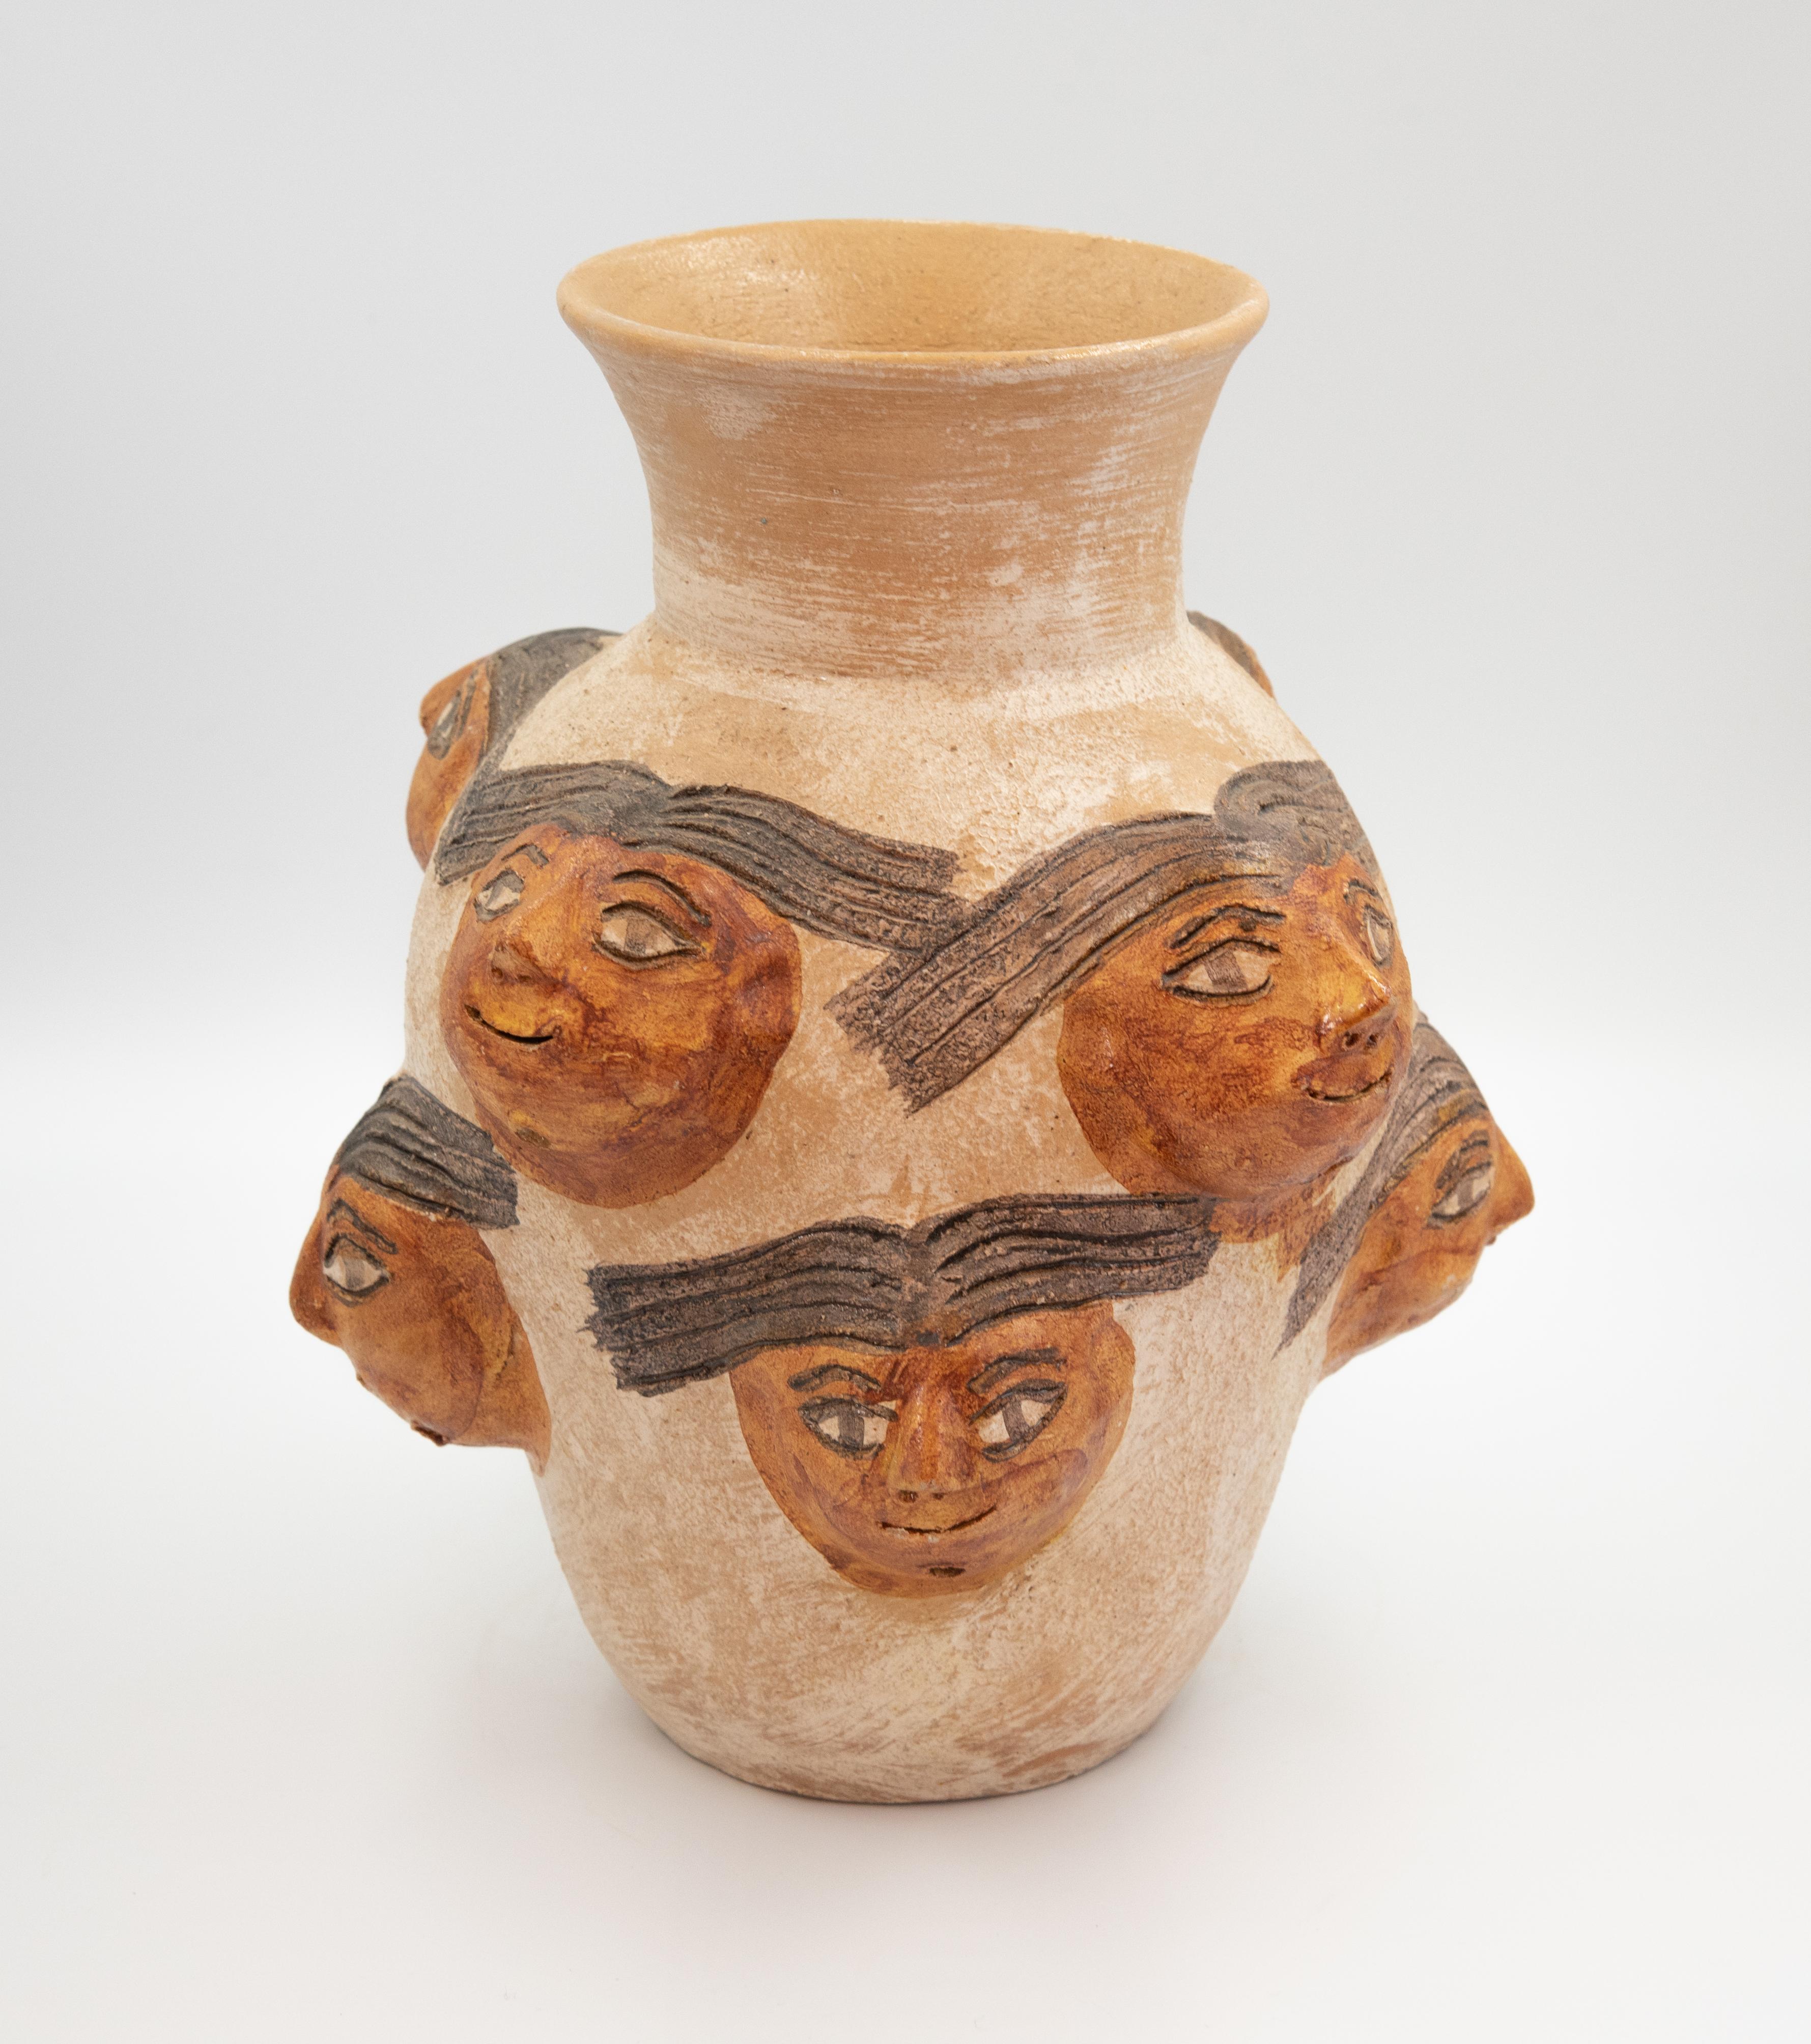 Dolores Porras Enríquez (1937) is widely known throughout Mexico and the world for being the creator of a technique rooted in the land of Oaxaca: pottery in natural color, glazed and decorated with floral motifs and colorful animals. 

In the